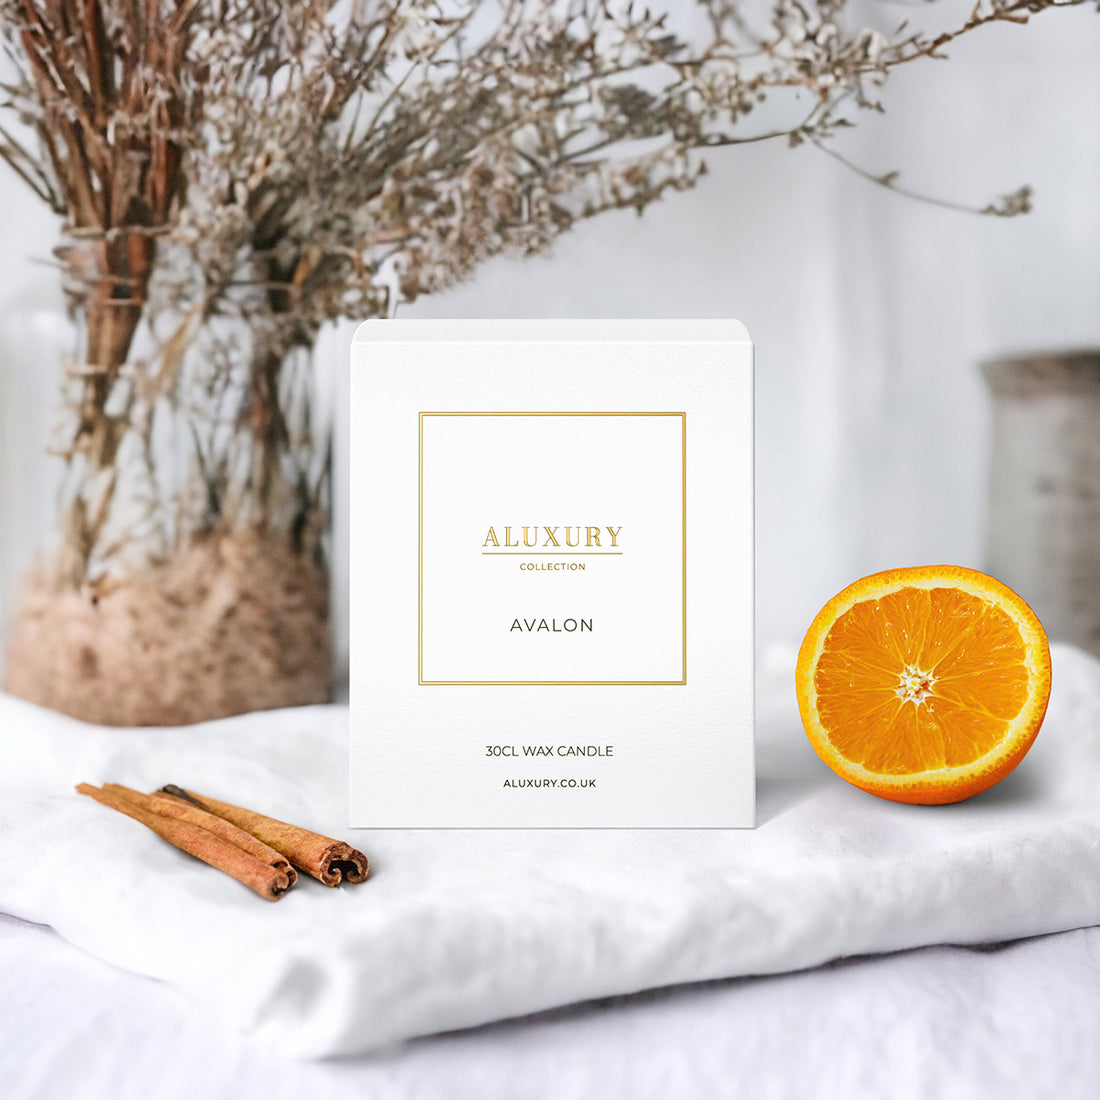 Avalon 30cl candle box by ALUXURY